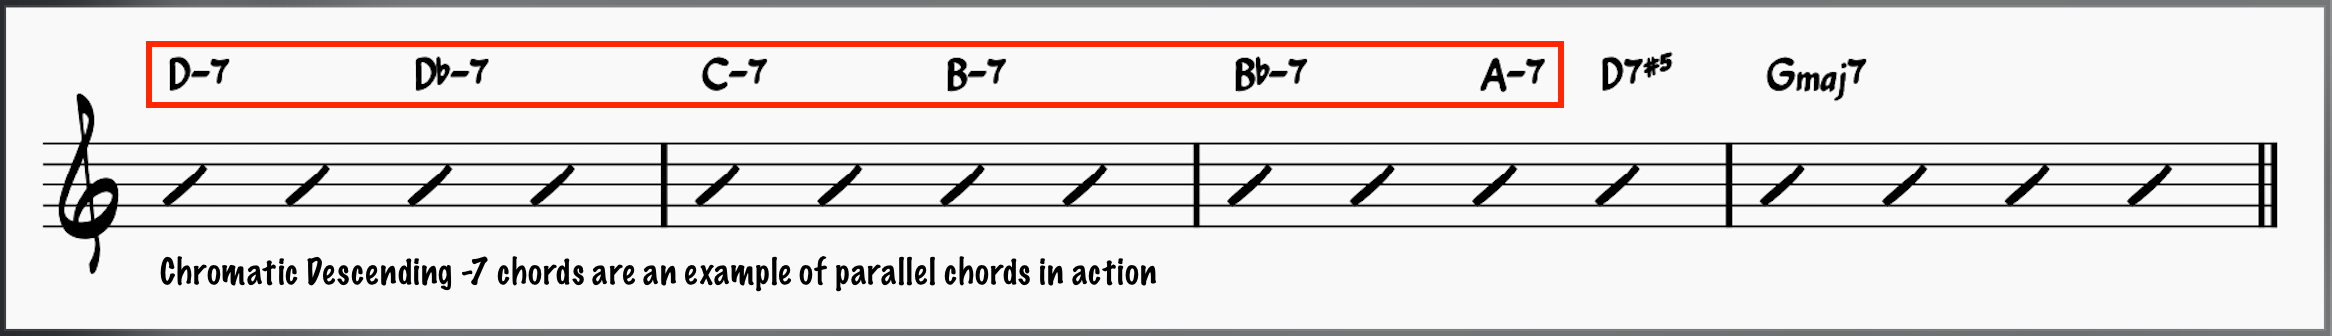 Chord Progression Using Parallel Chords